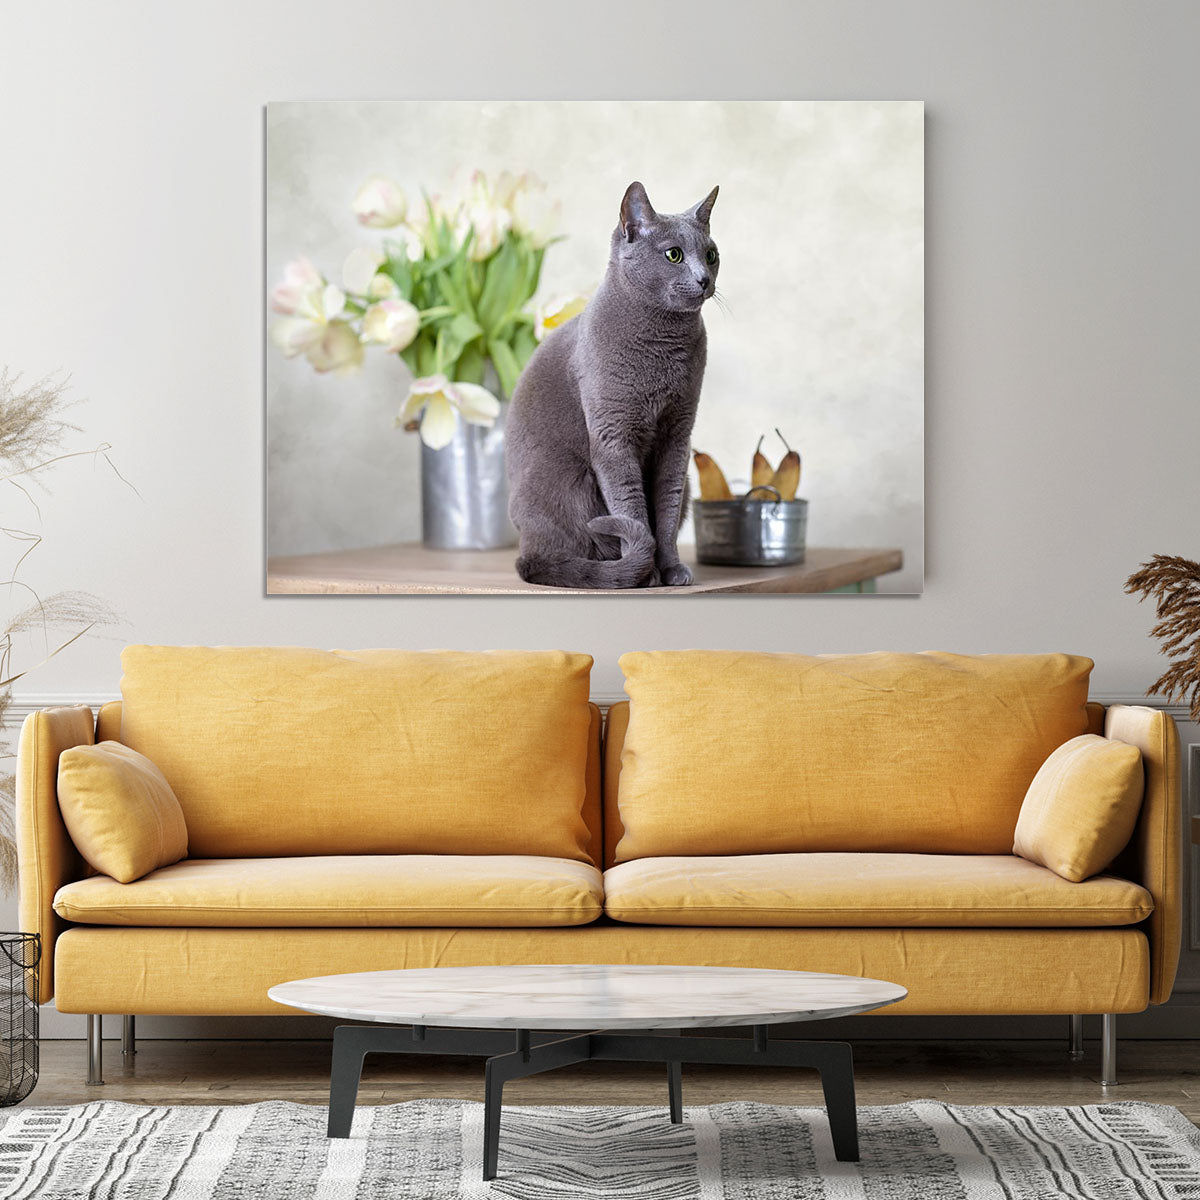 Russian Blue cat sitting on table with pears and tulips Canvas Print or Poster - Canvas Art Rocks - 4